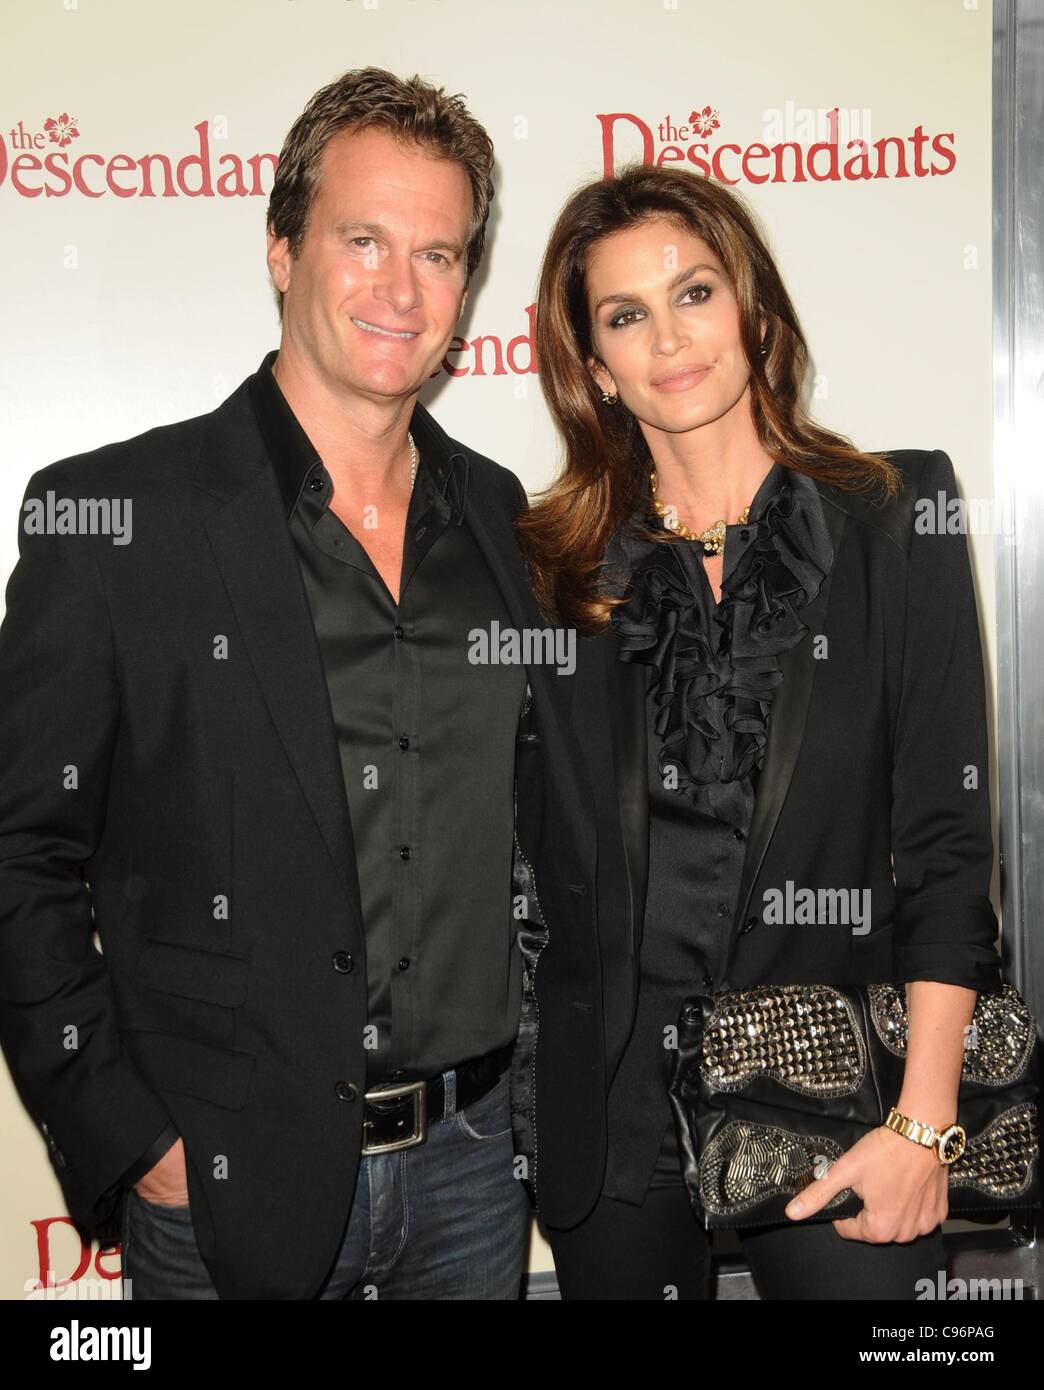 Cindy Crawford, Randy Gerber at arrivals for THE DESCENDANTS Premiere, Samuel Goldwyn Theater at AMPAS, Los Angeles, CA November 15, 2011. Photo By: Dee Cercone/Everett Collection Stock Photo